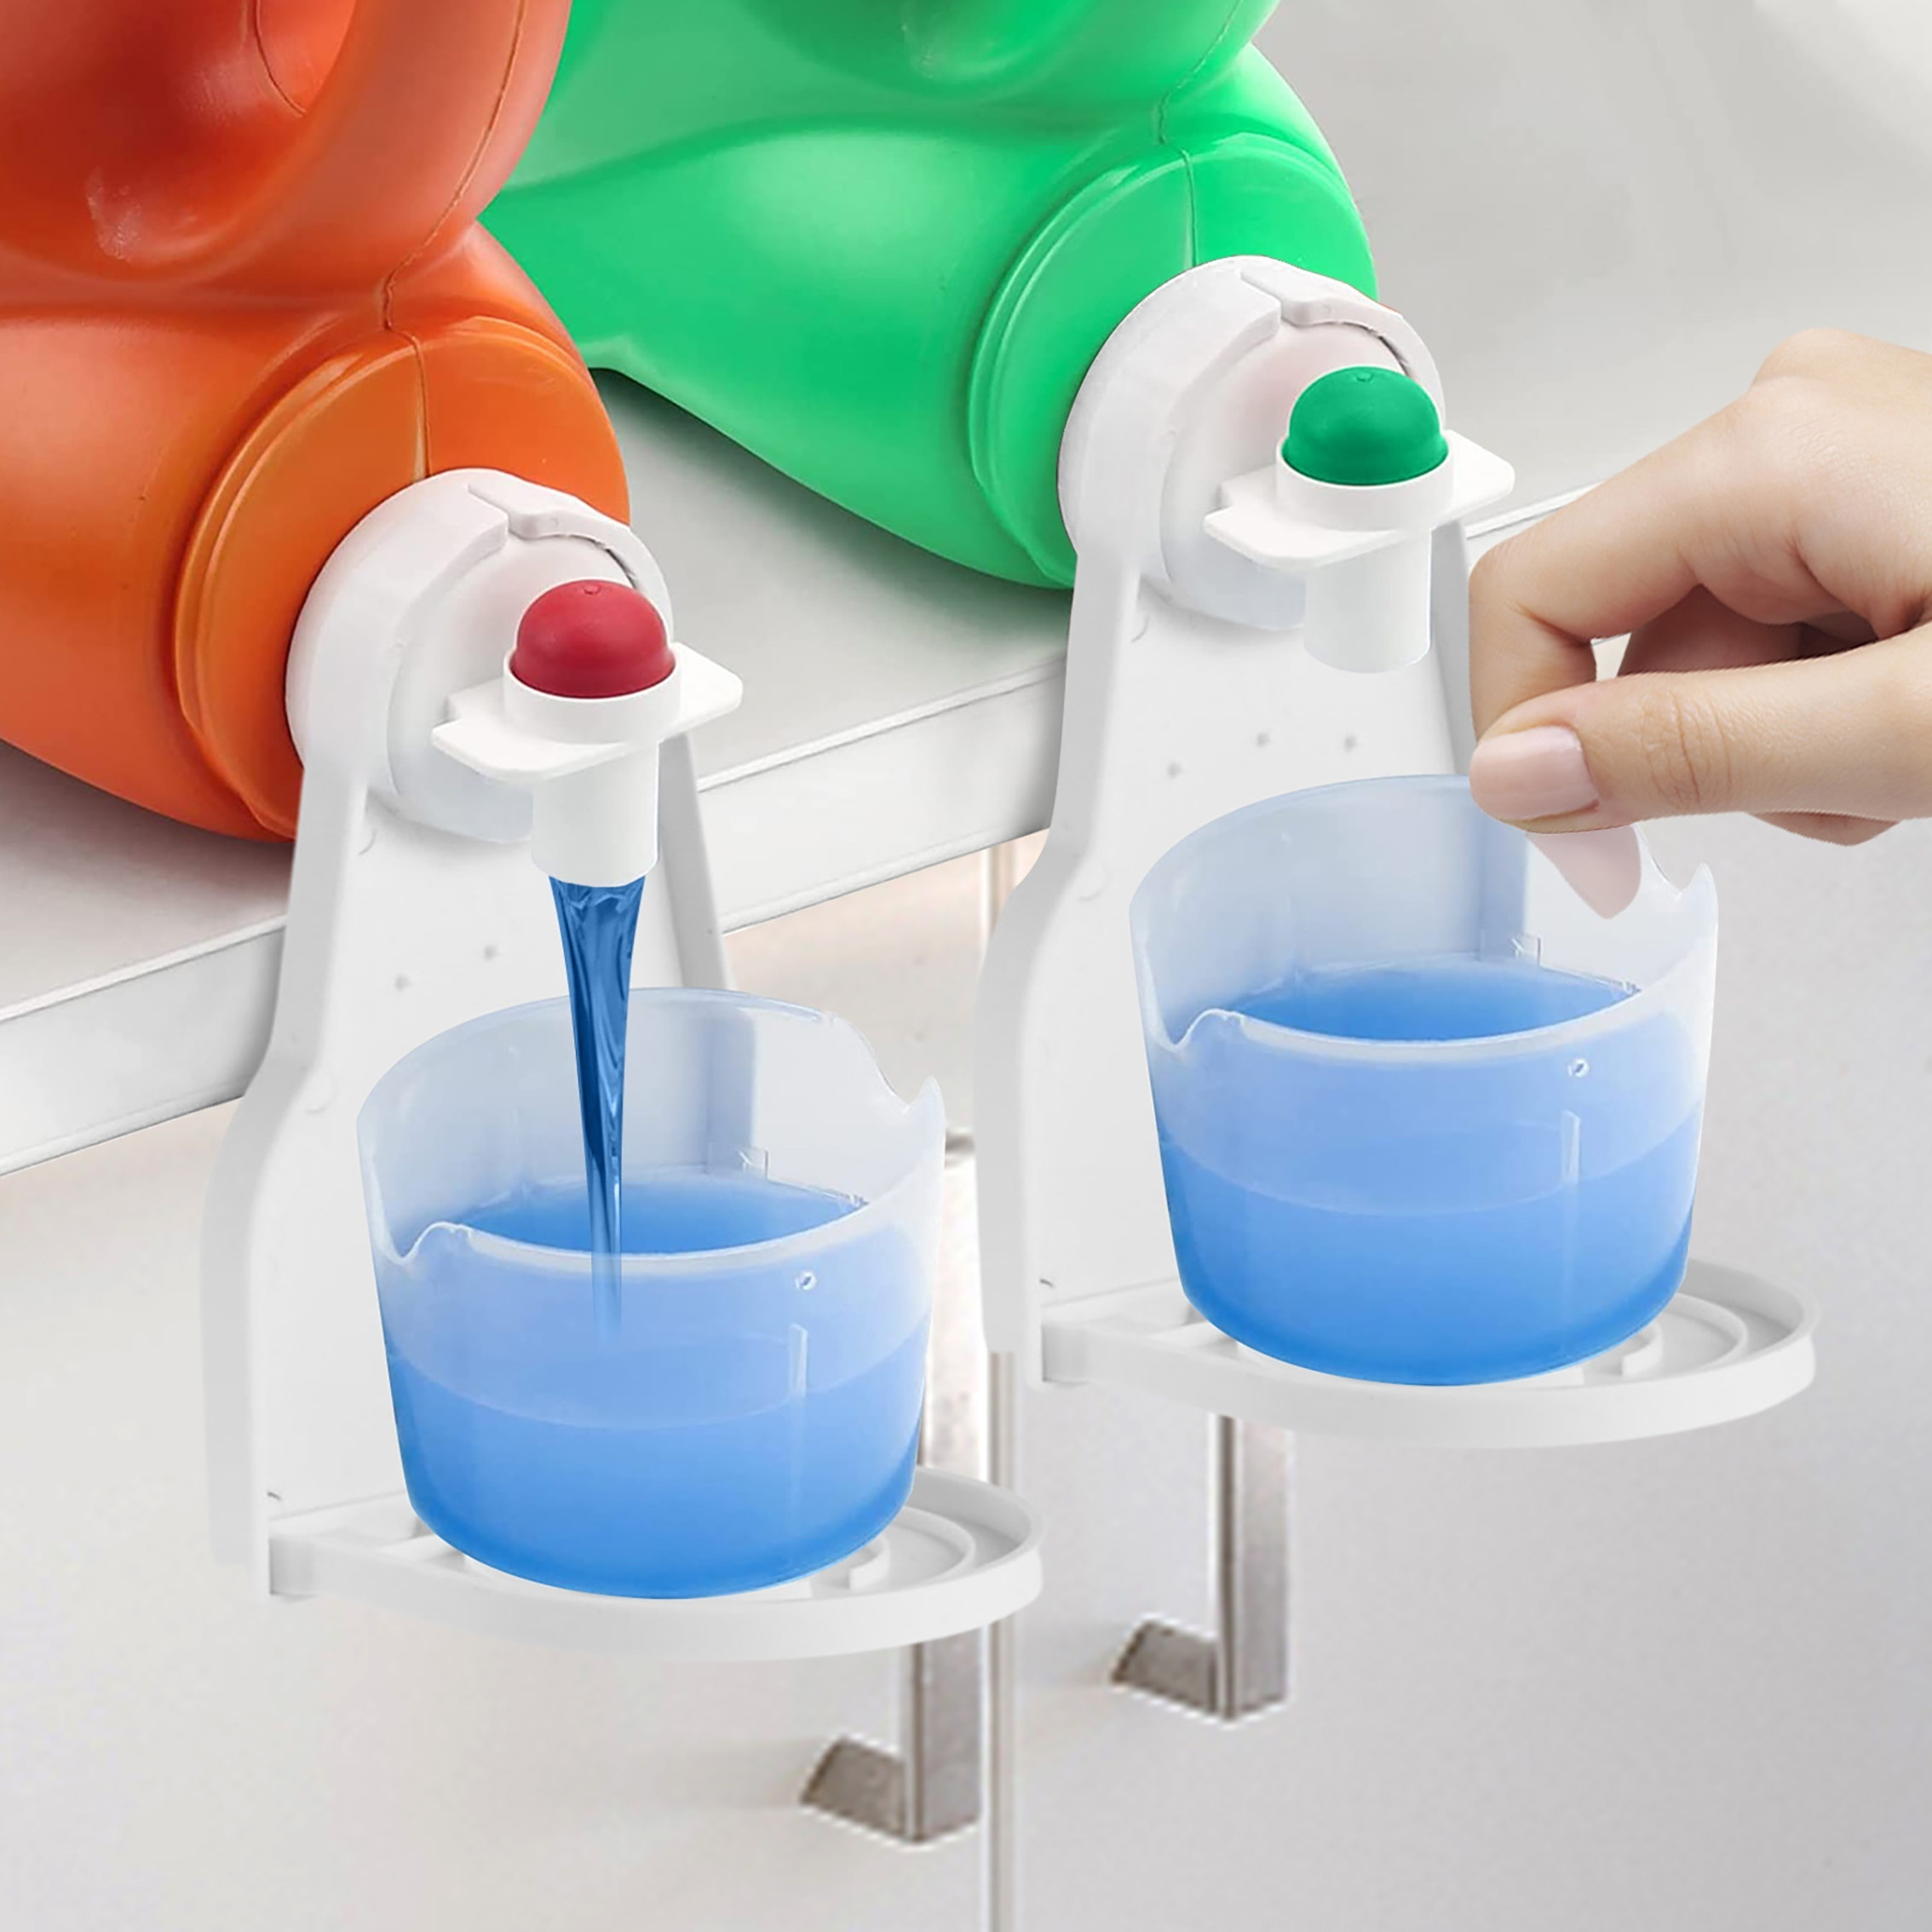 1pc Laundry Detergent Cup Holder, Detergent Drip Catcher, Screw Design Can  Firmly Hold On Laundry Bottle Spouts, Fits Most Economic Sized Bottles, Kee